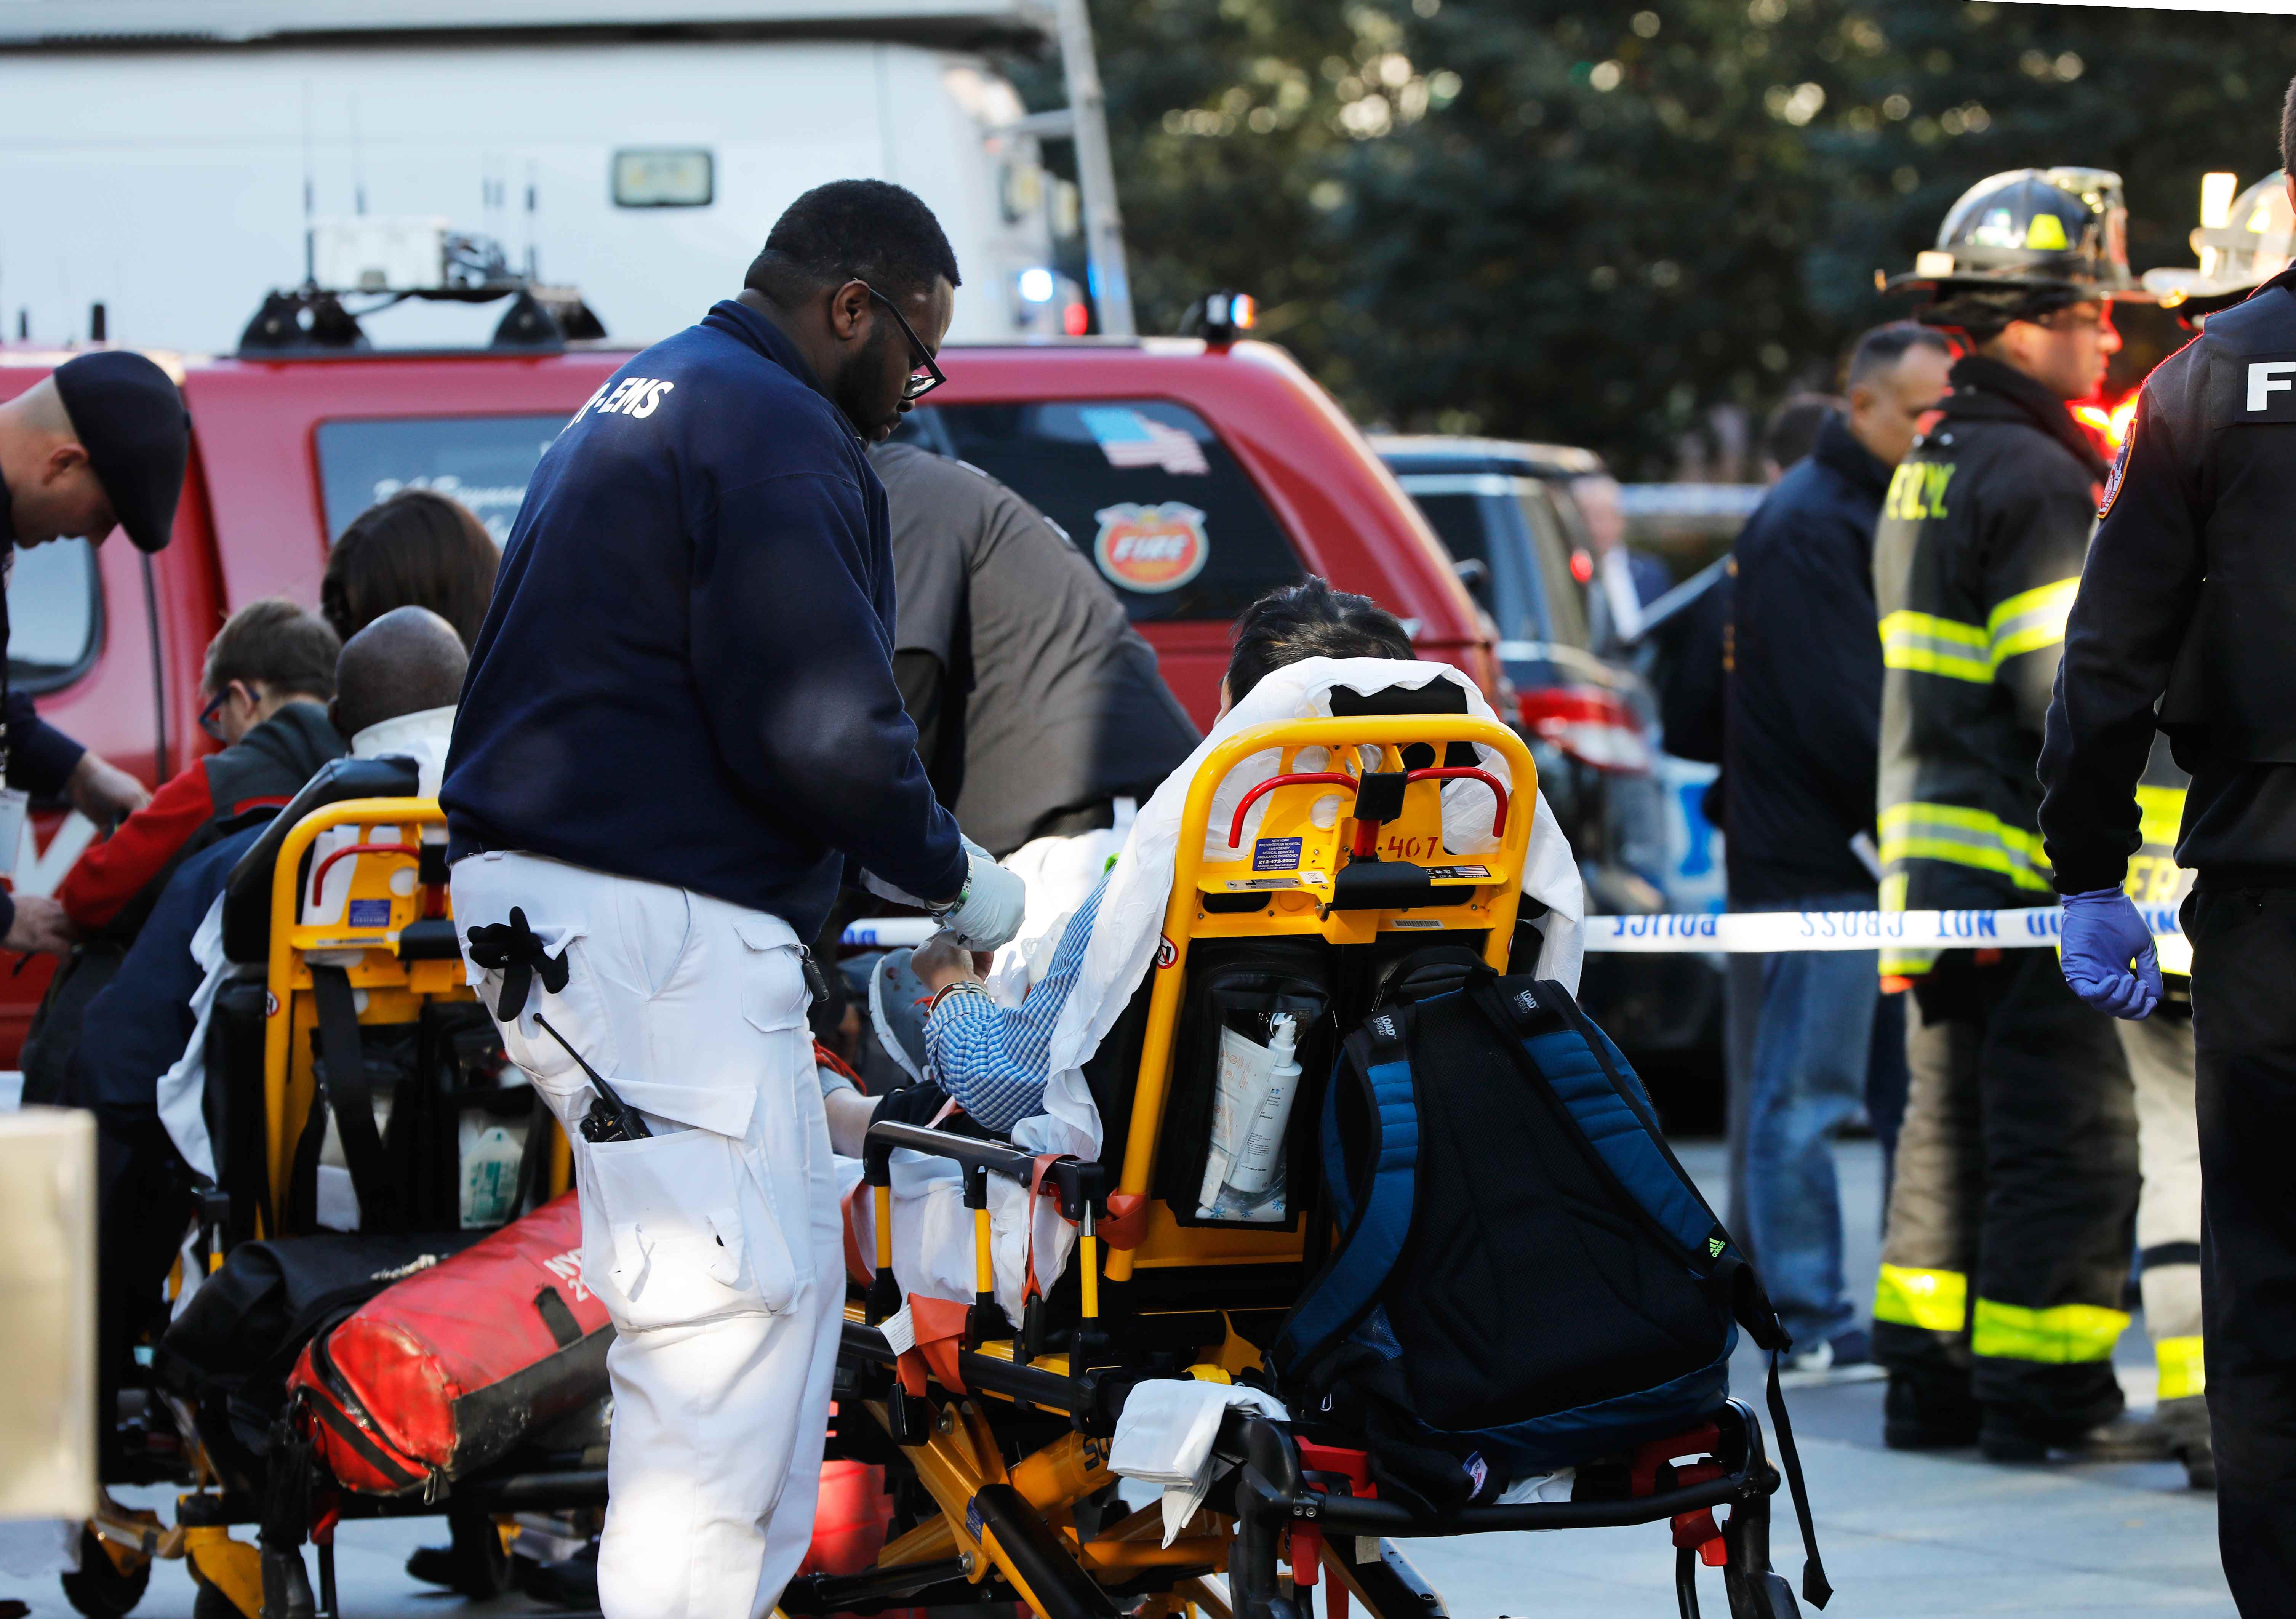 First responders tend to a victim after a shooting incident in New York City